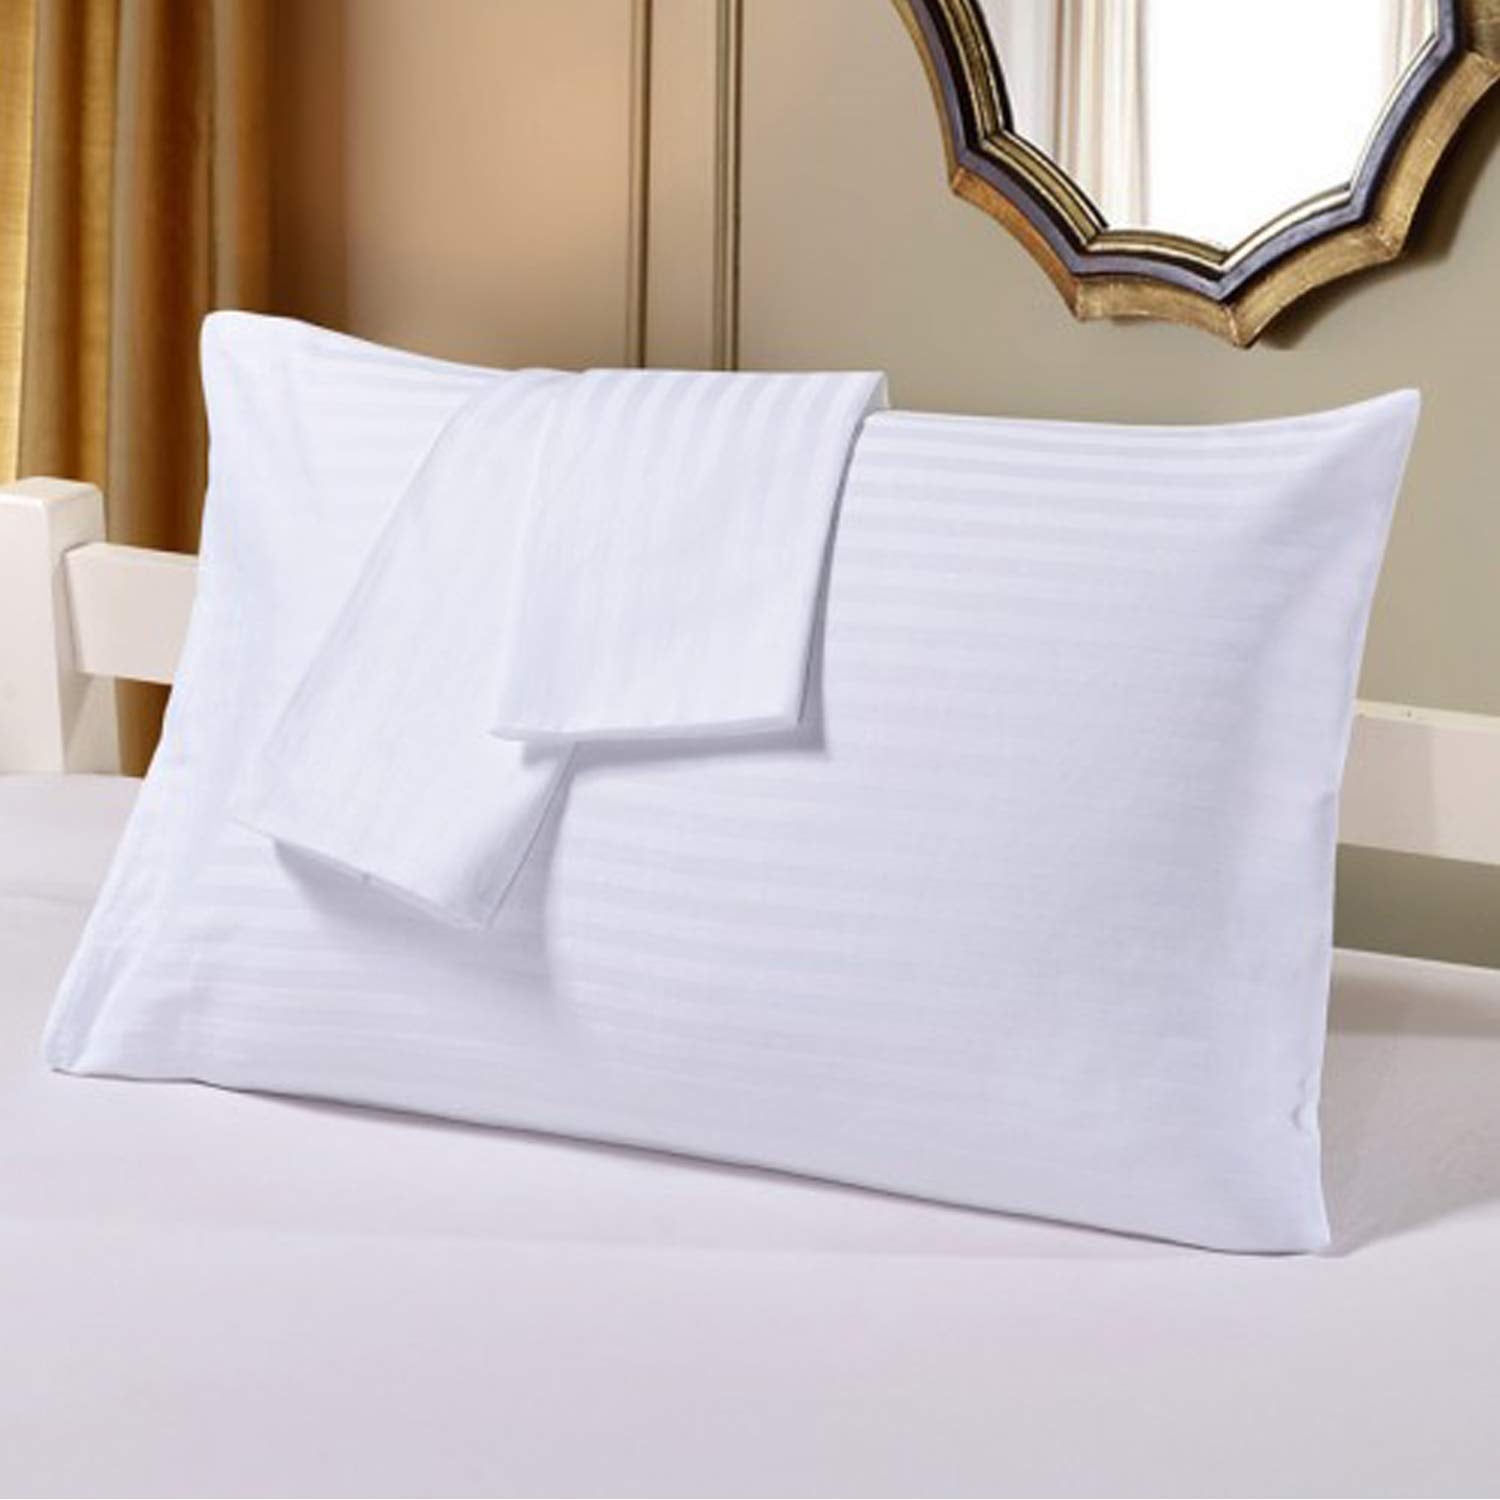 Kuber Industries 2 Pieces Cotton Luxurious Pillow Cover|Ultra Soft Satin Striped Pillow Case|Breathable & Wrinkle Free|Pack of 2 (White)-CTKTC040309, 200 TC